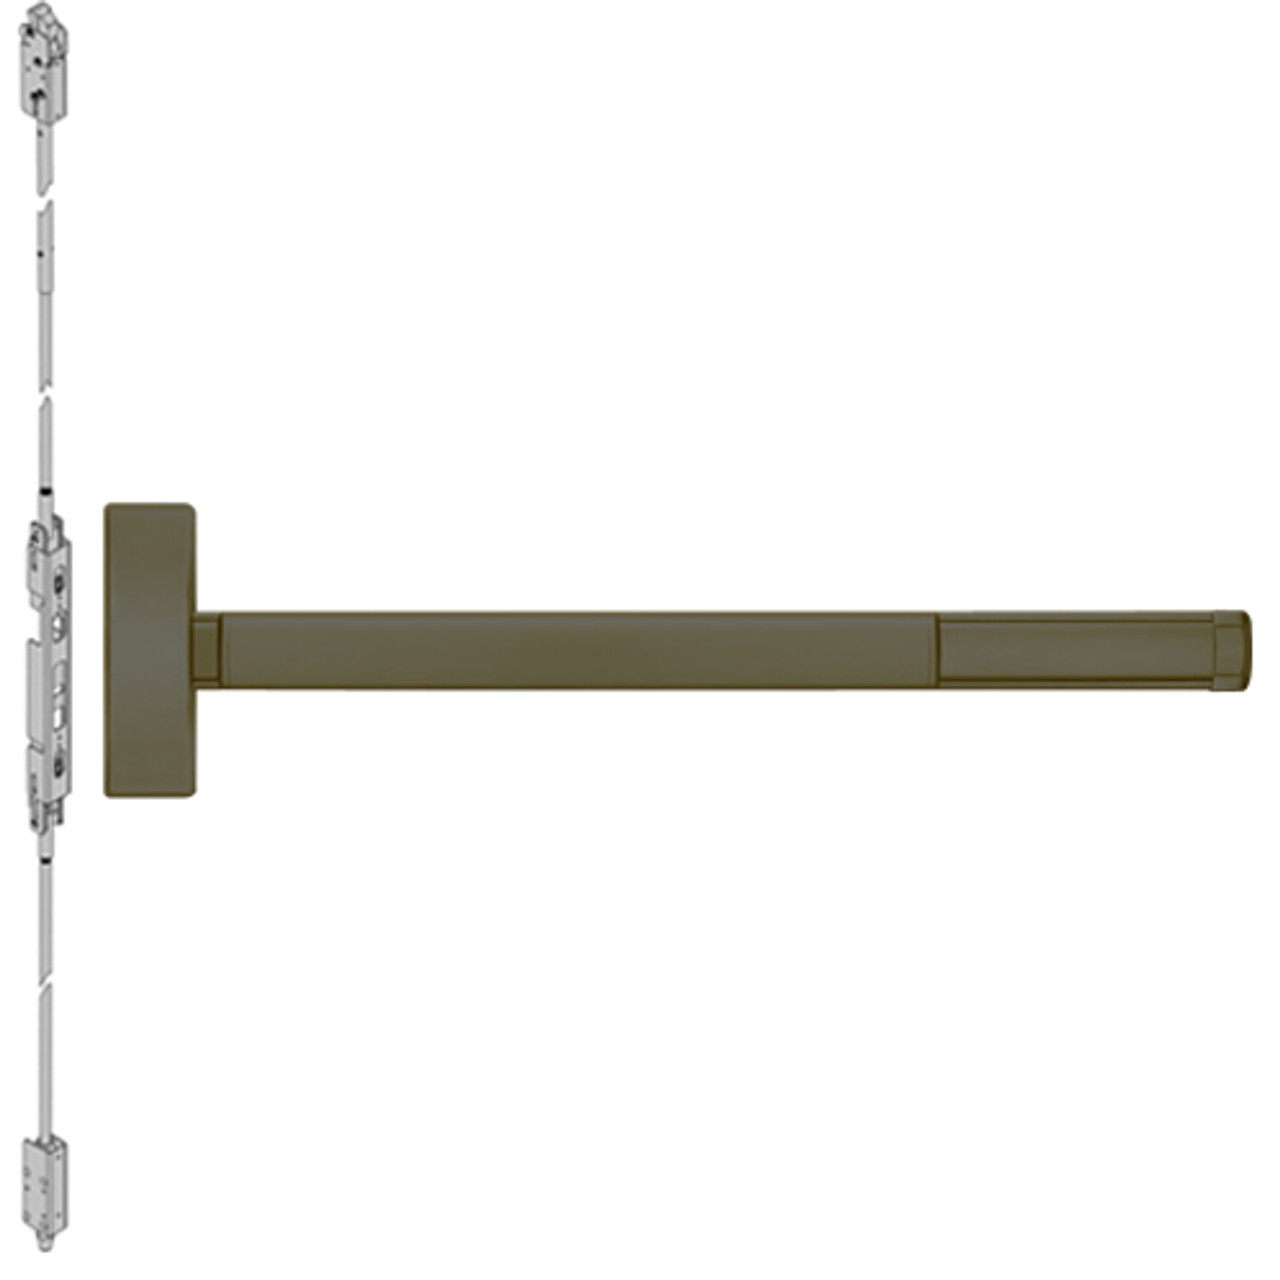 DE2803-613-48 PHI 2800 Series Concealed Vertical Rod Exit Device with Delayed Egress Prepped for Key Retracts Latchbolt in Oil Rubbed Bronze Finish